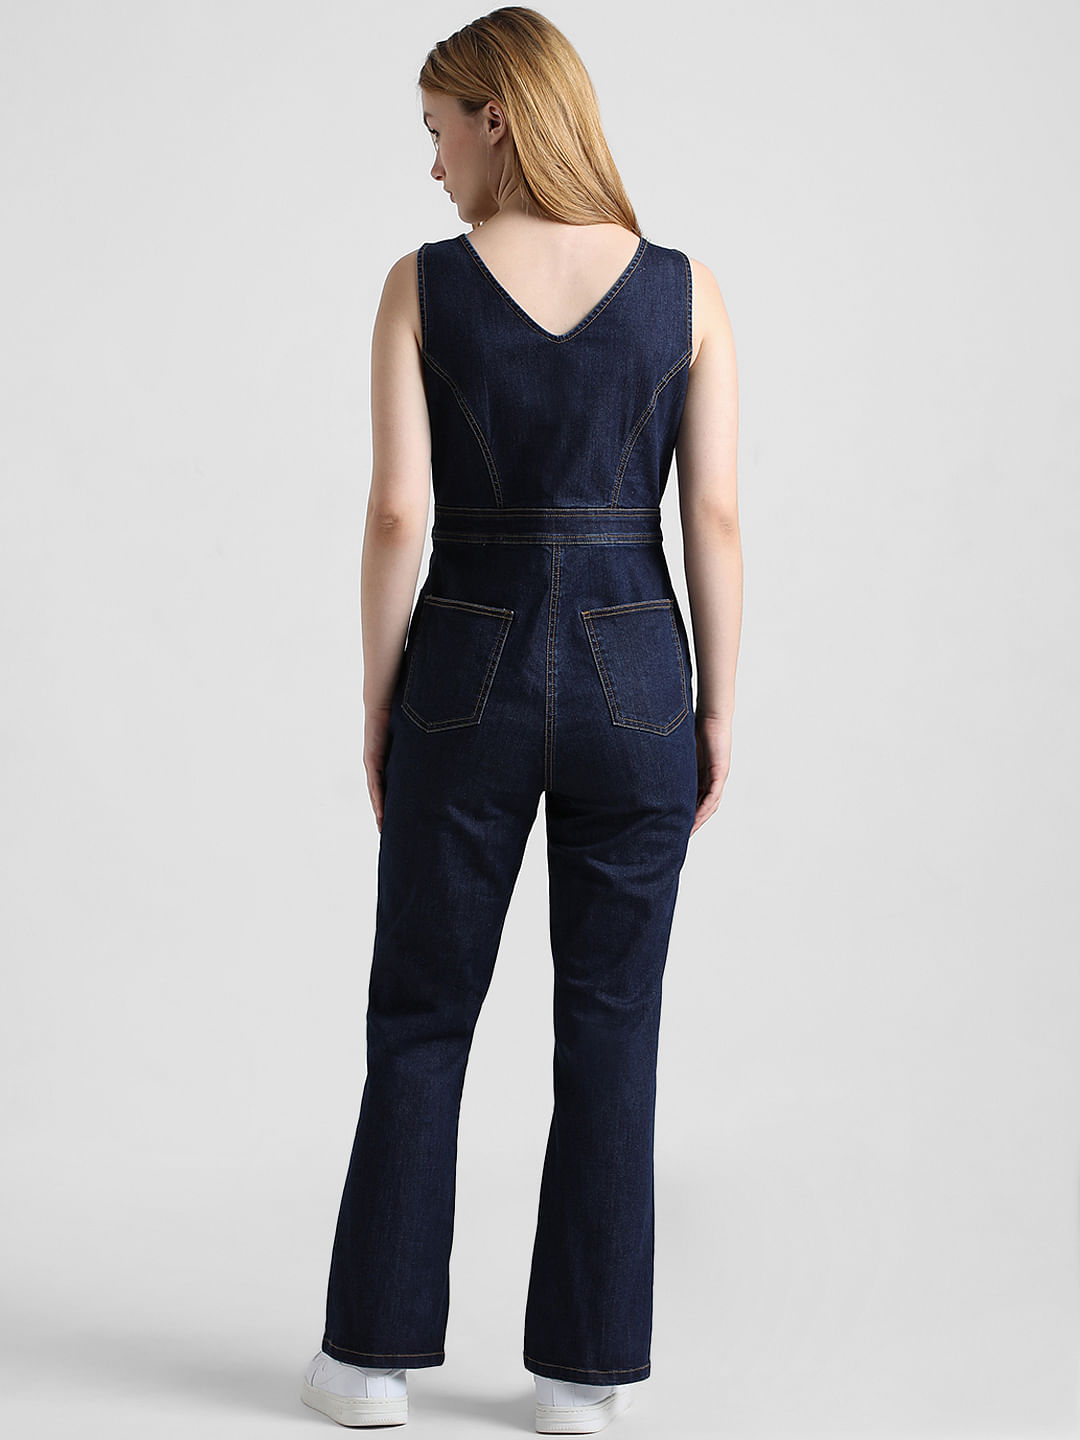 Amazon.com: Jowowha Youth Girls Blue Denim Jumpsuit Flying Sleeve Wide Leg  Jeans Overalls Romper Summer Casual Suit Dark Blue Sleeveless 8 Years:  Clothing, Shoes & Jewelry